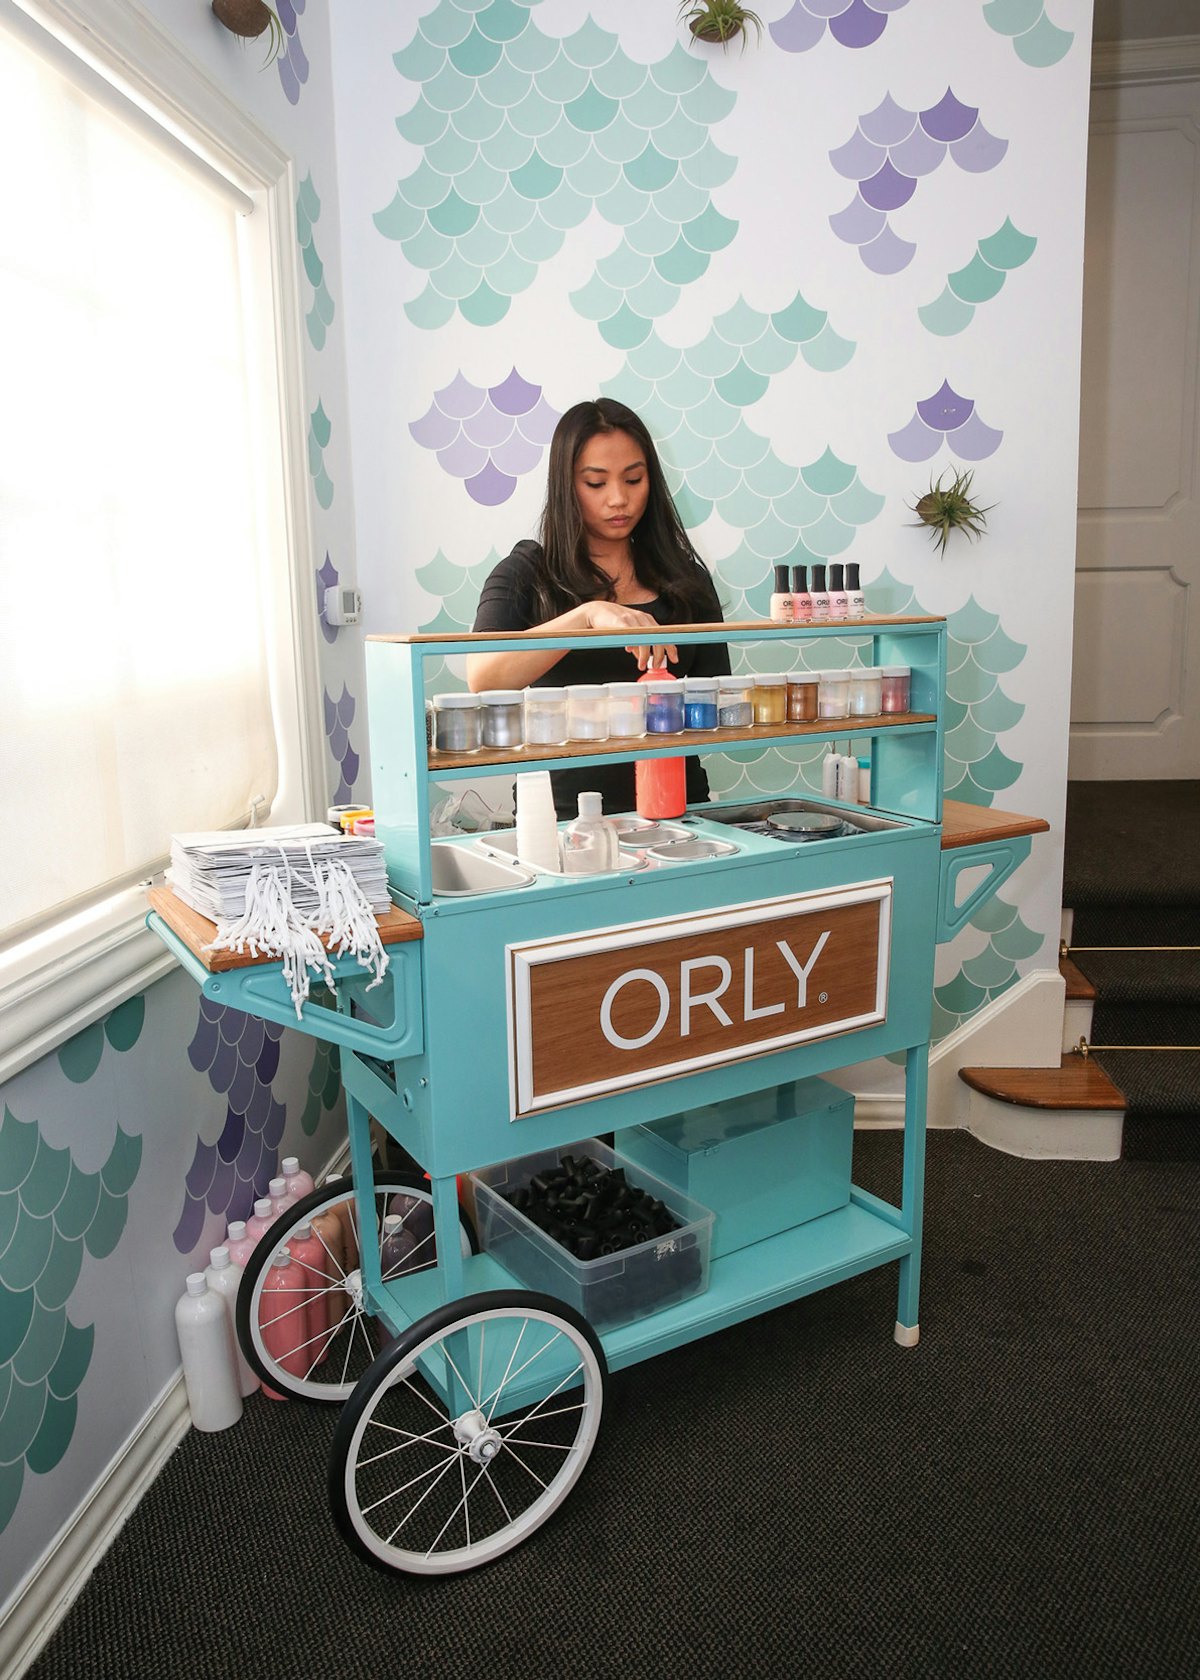 Next Growth Generation for the Taps Orly | Nailpro